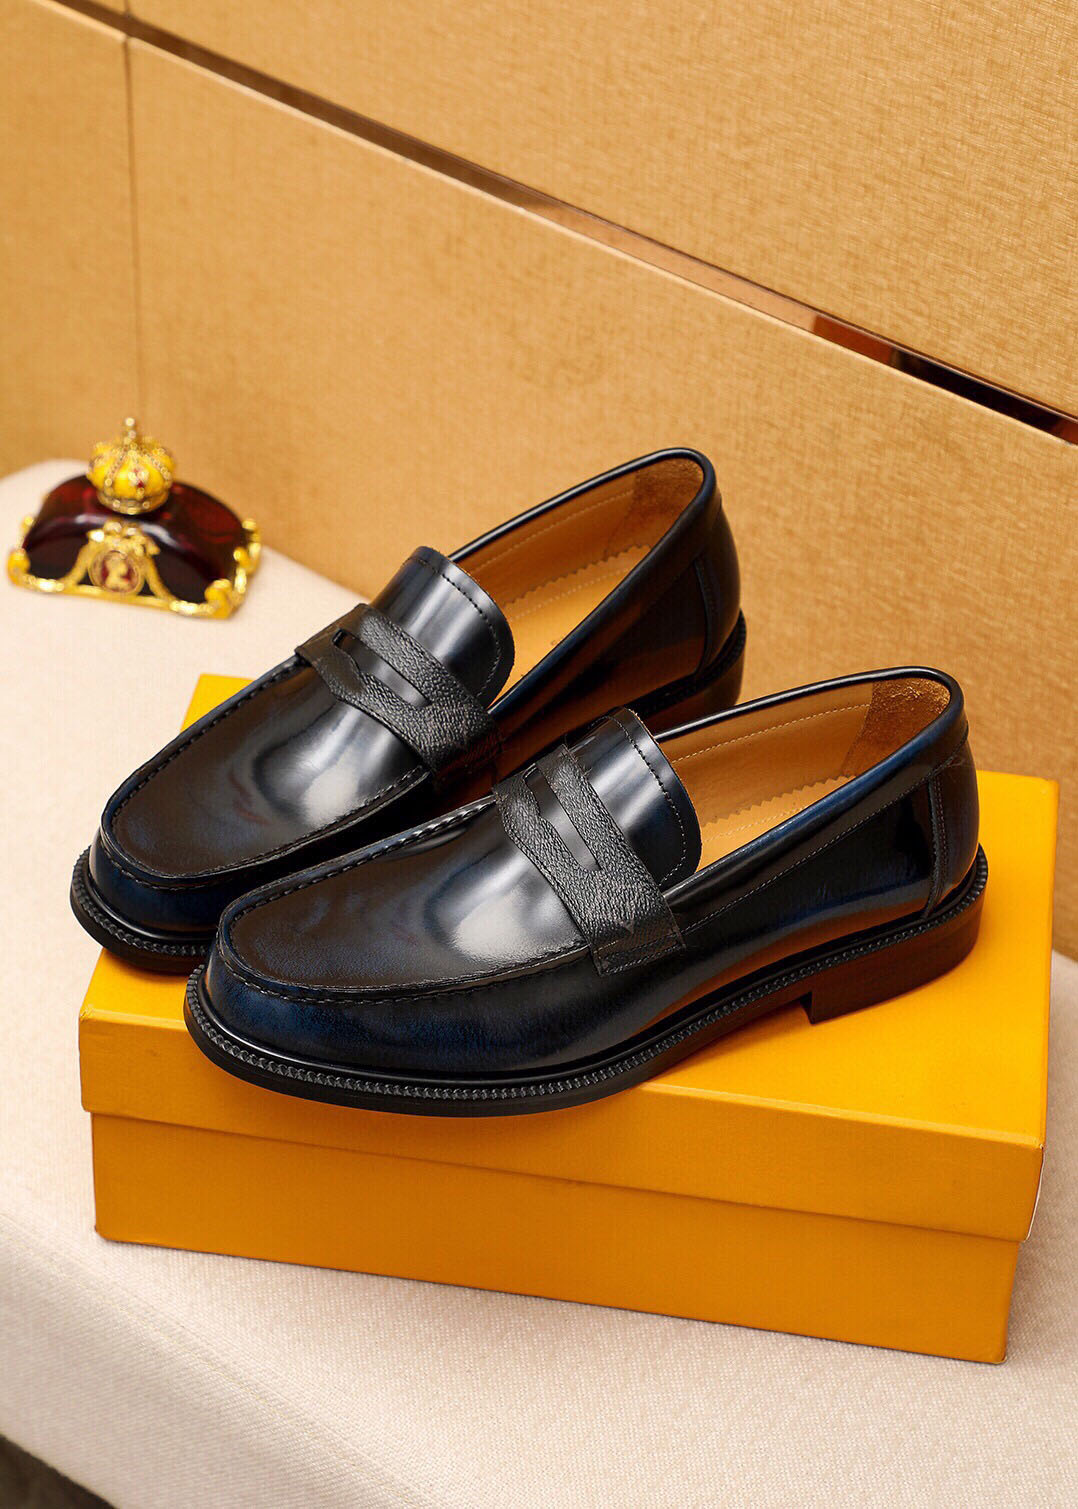 2023 Mens Dress Shoes Fashion Genuine Leather Loafers Brand Designer Casual Slip On Flats Men Office Formal Party Wedding Oxfords Size 38-45